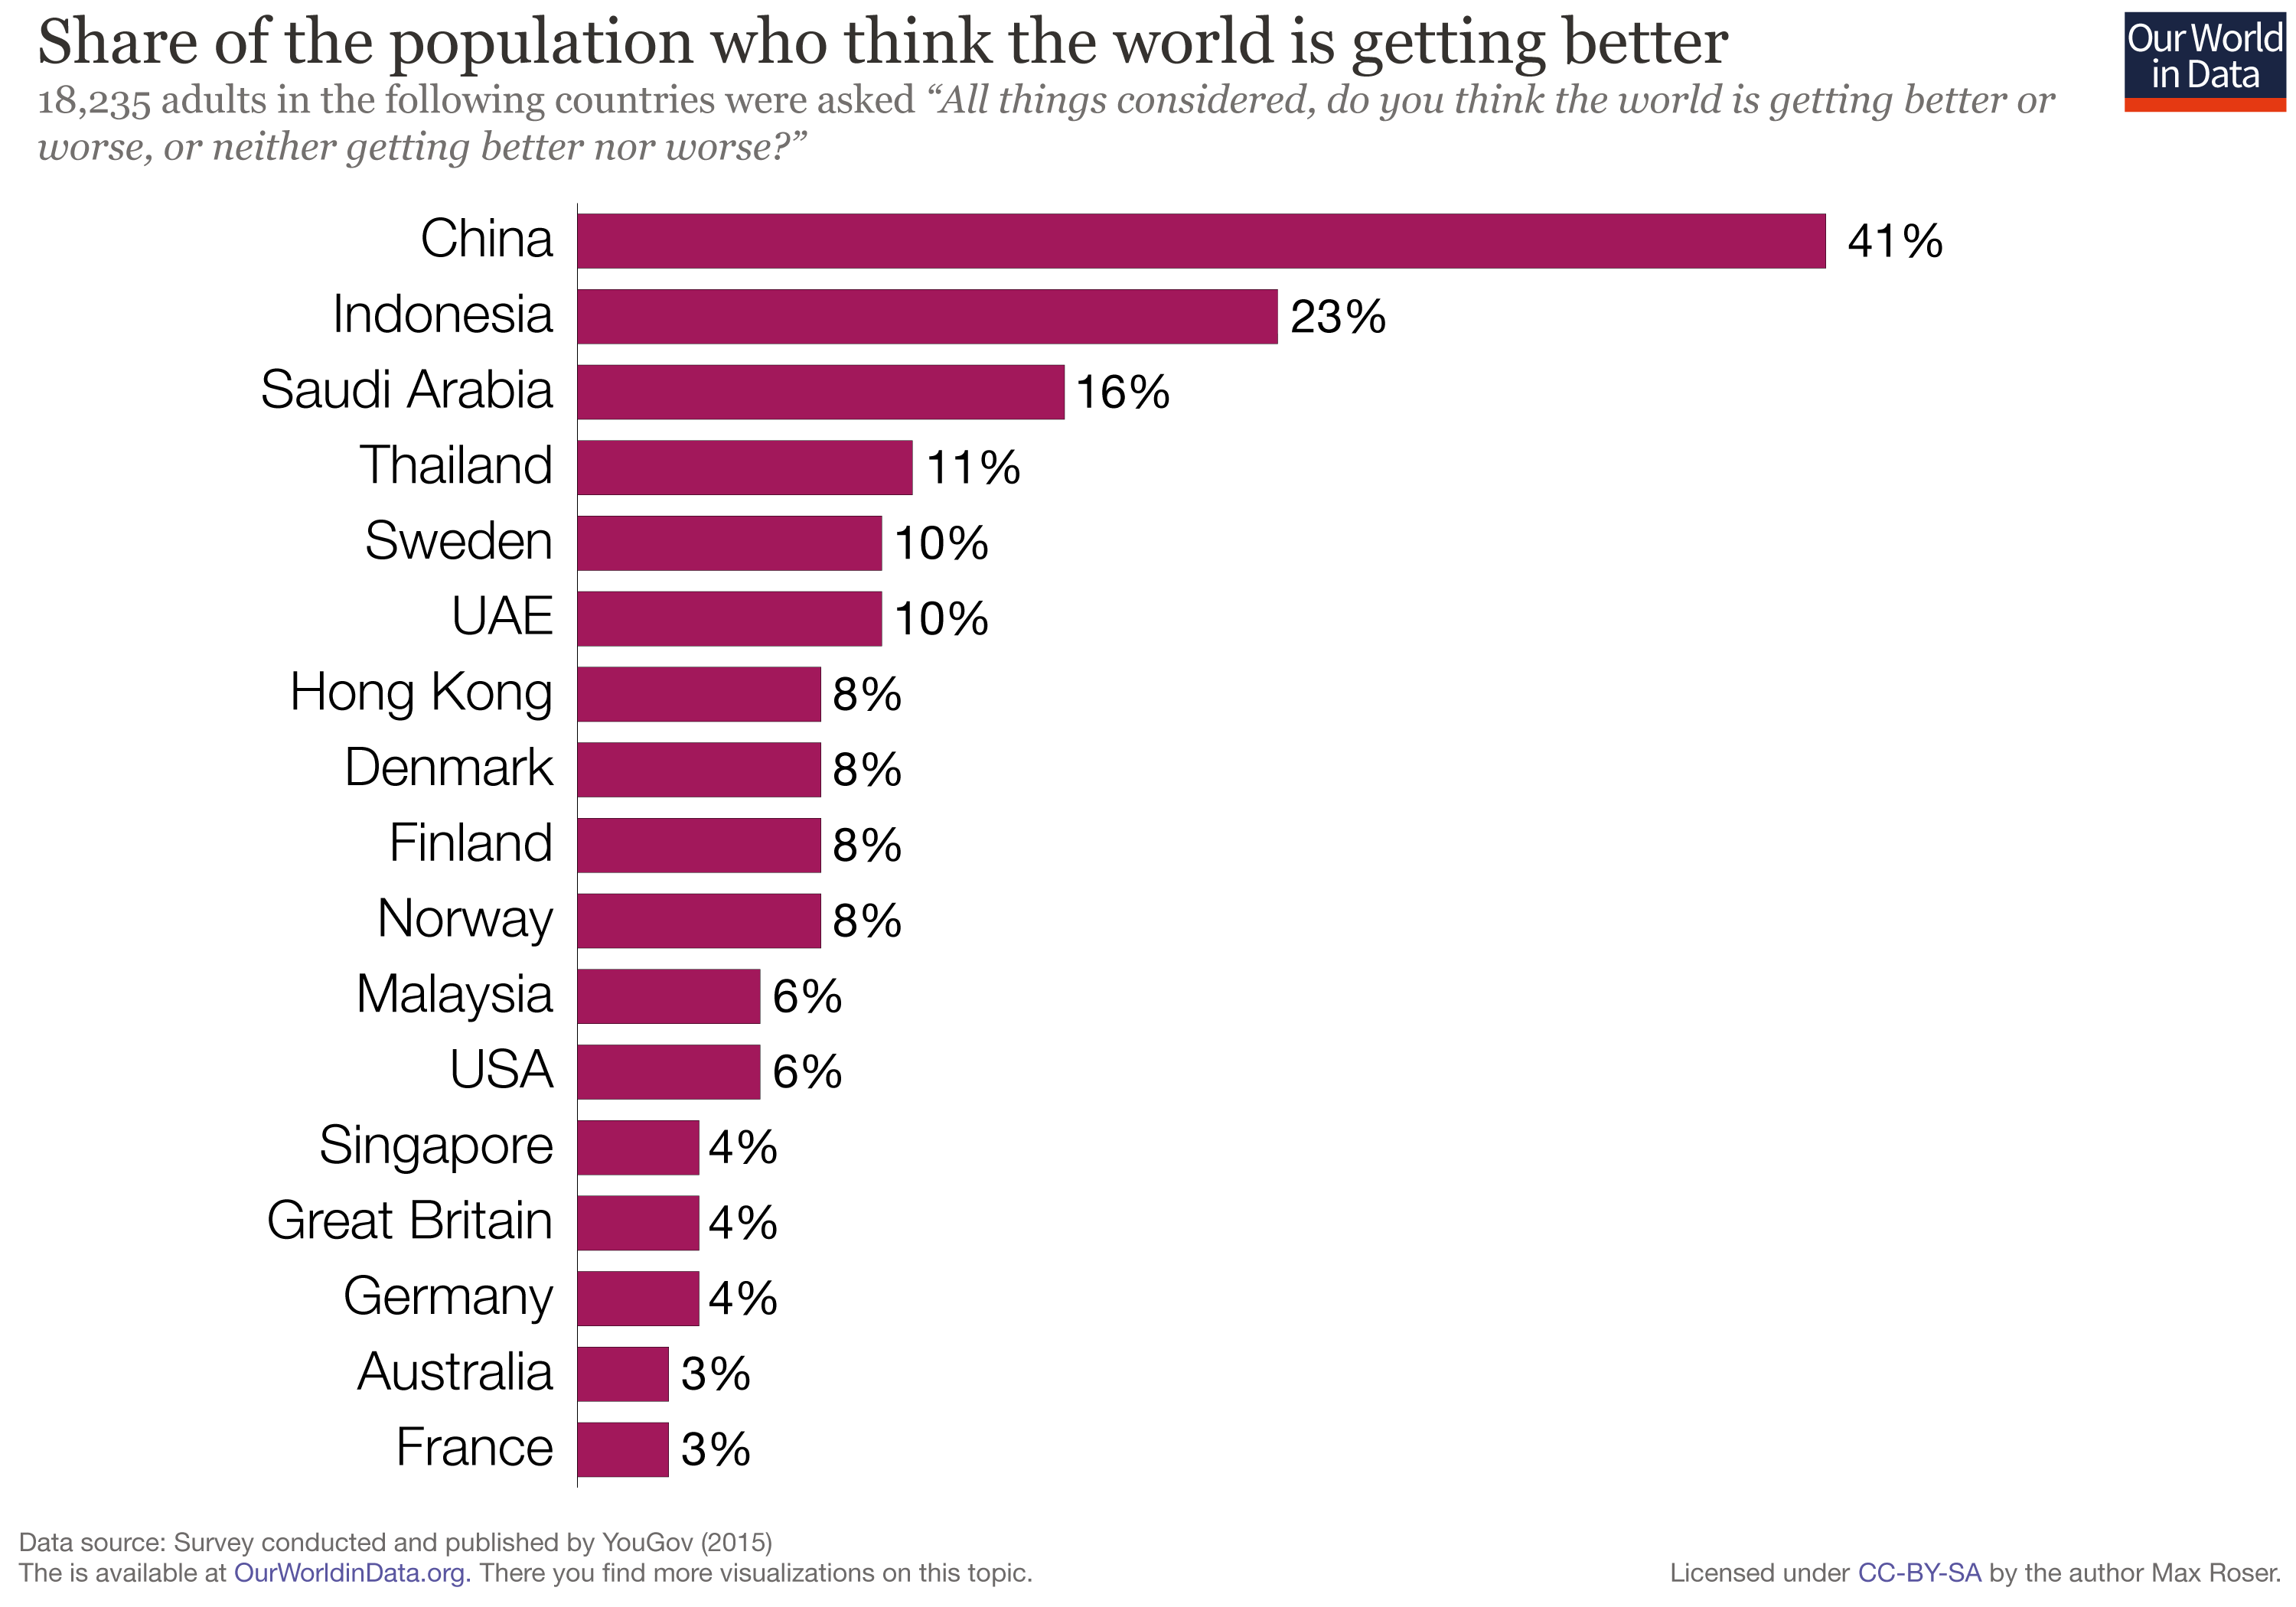 Bar chart of the share of people in each country that thinks the world is getting better showing that most people think the world is getting worse.